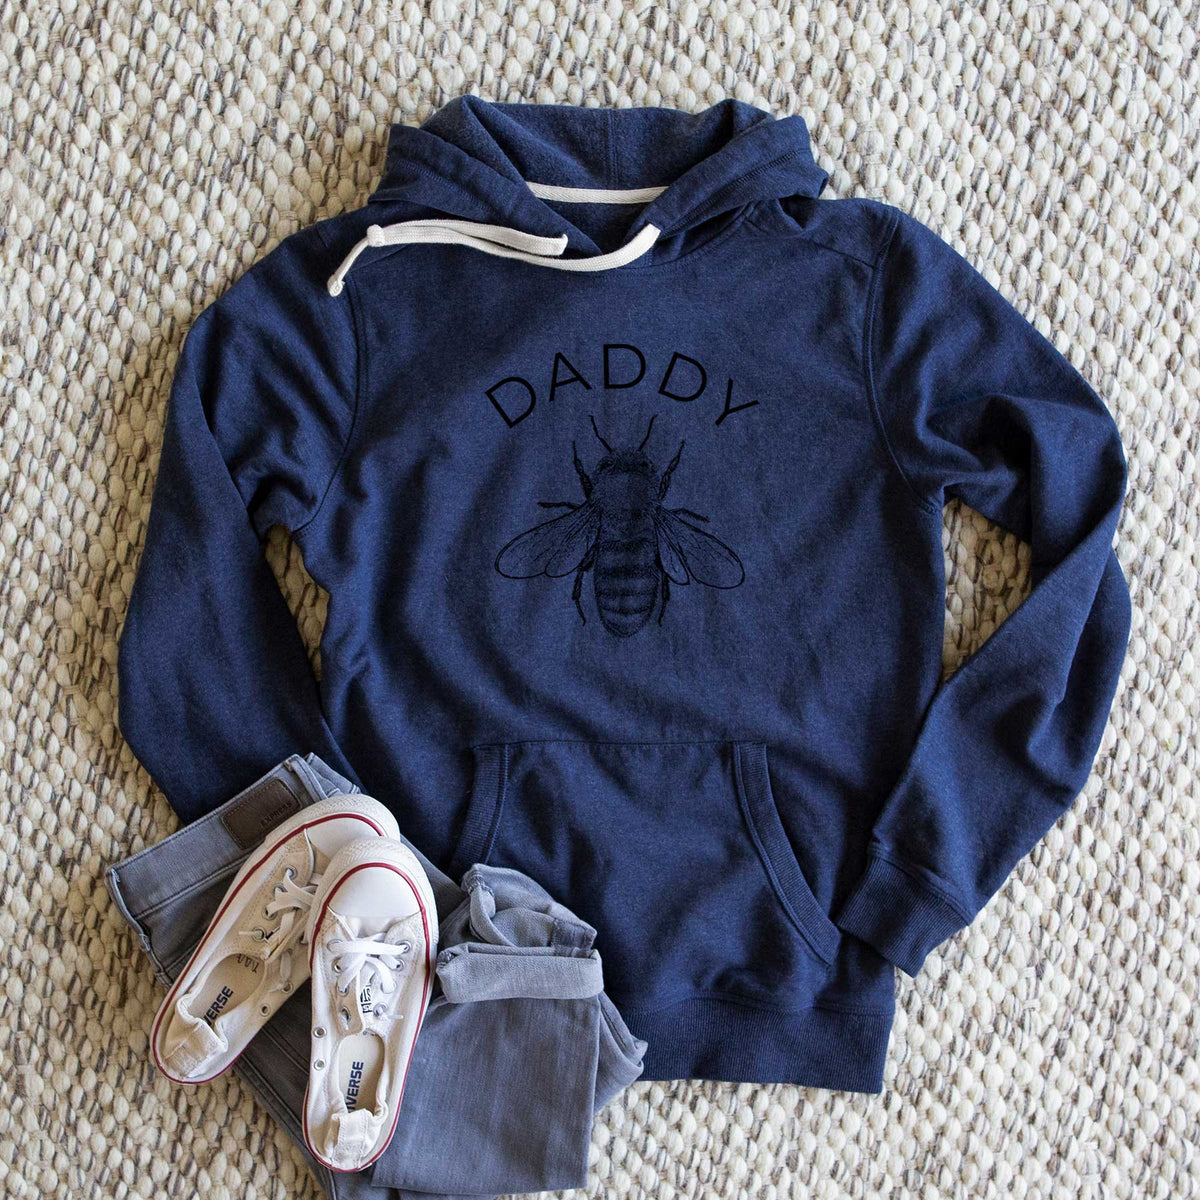 Daddy Bee - Unisex Recycled Hoodie - CLOSEOUT - FINAL SALE